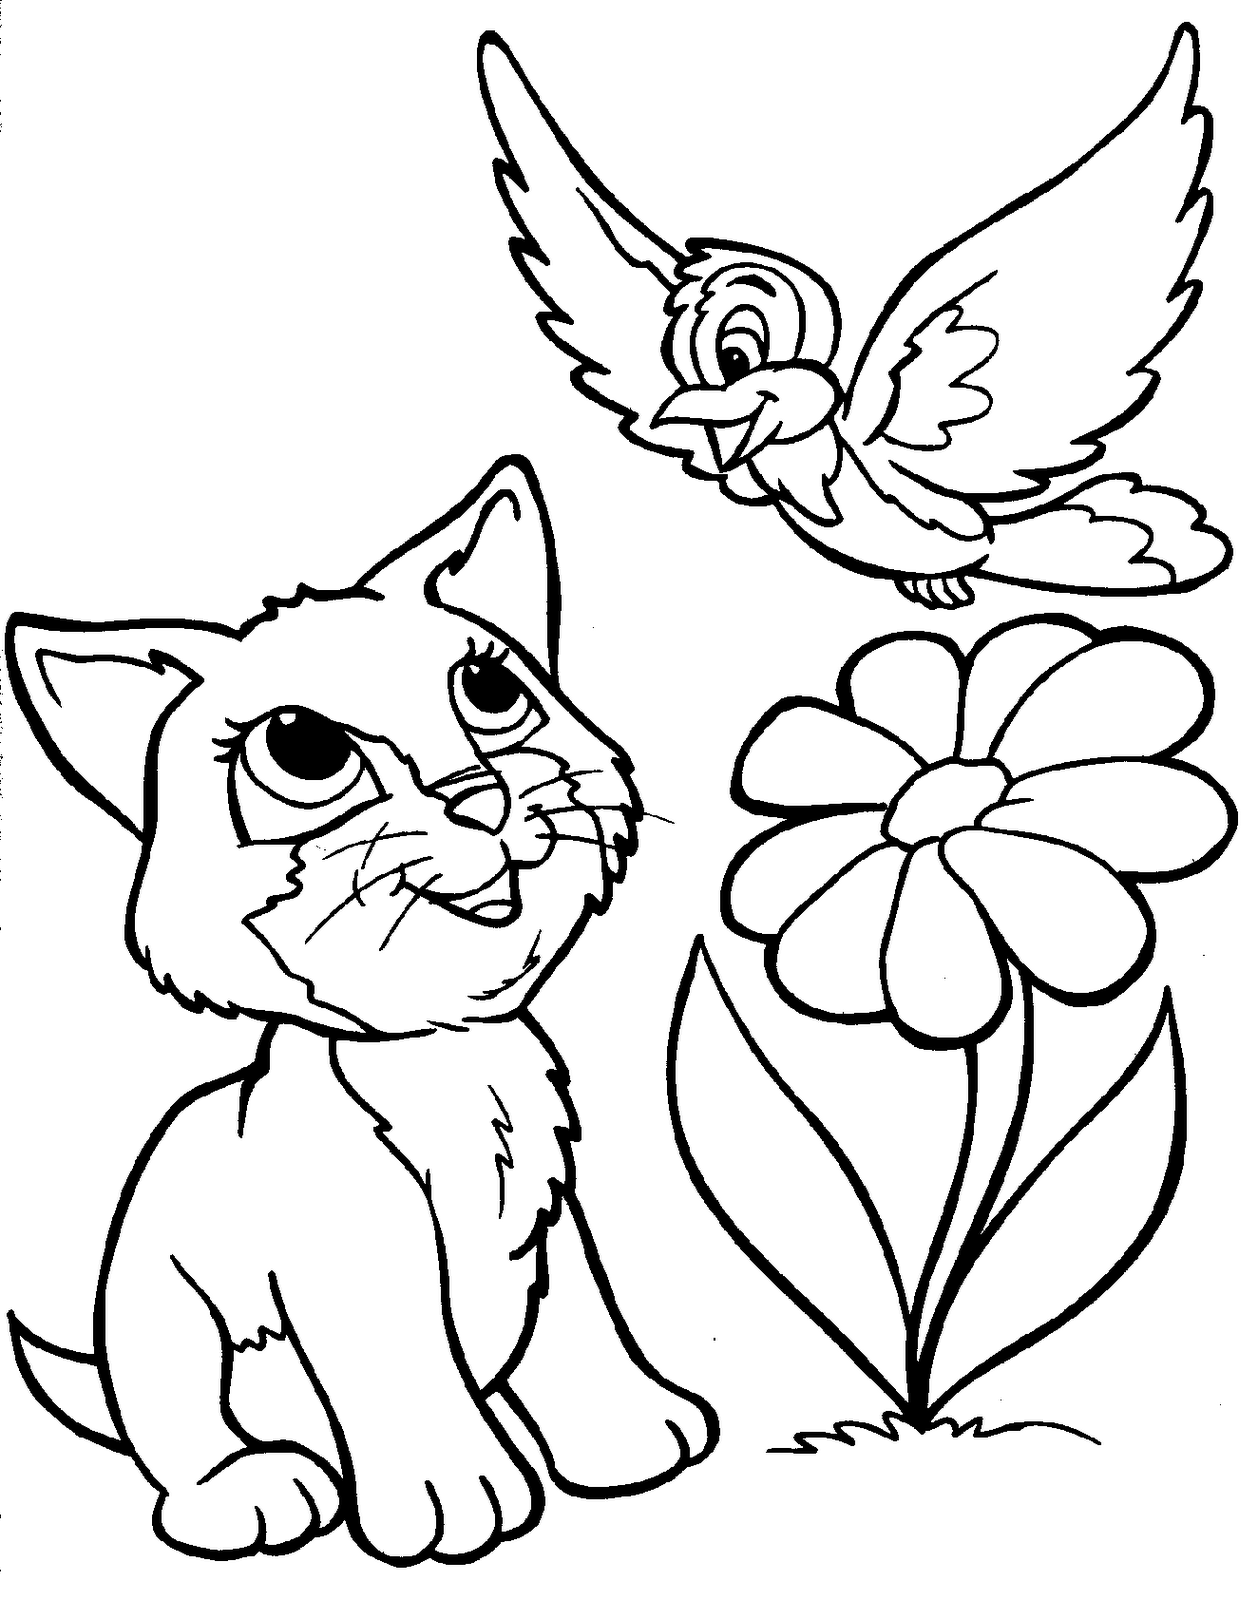 1000 images about Coloring Pages on Pinterest  Coloring pages Animal 